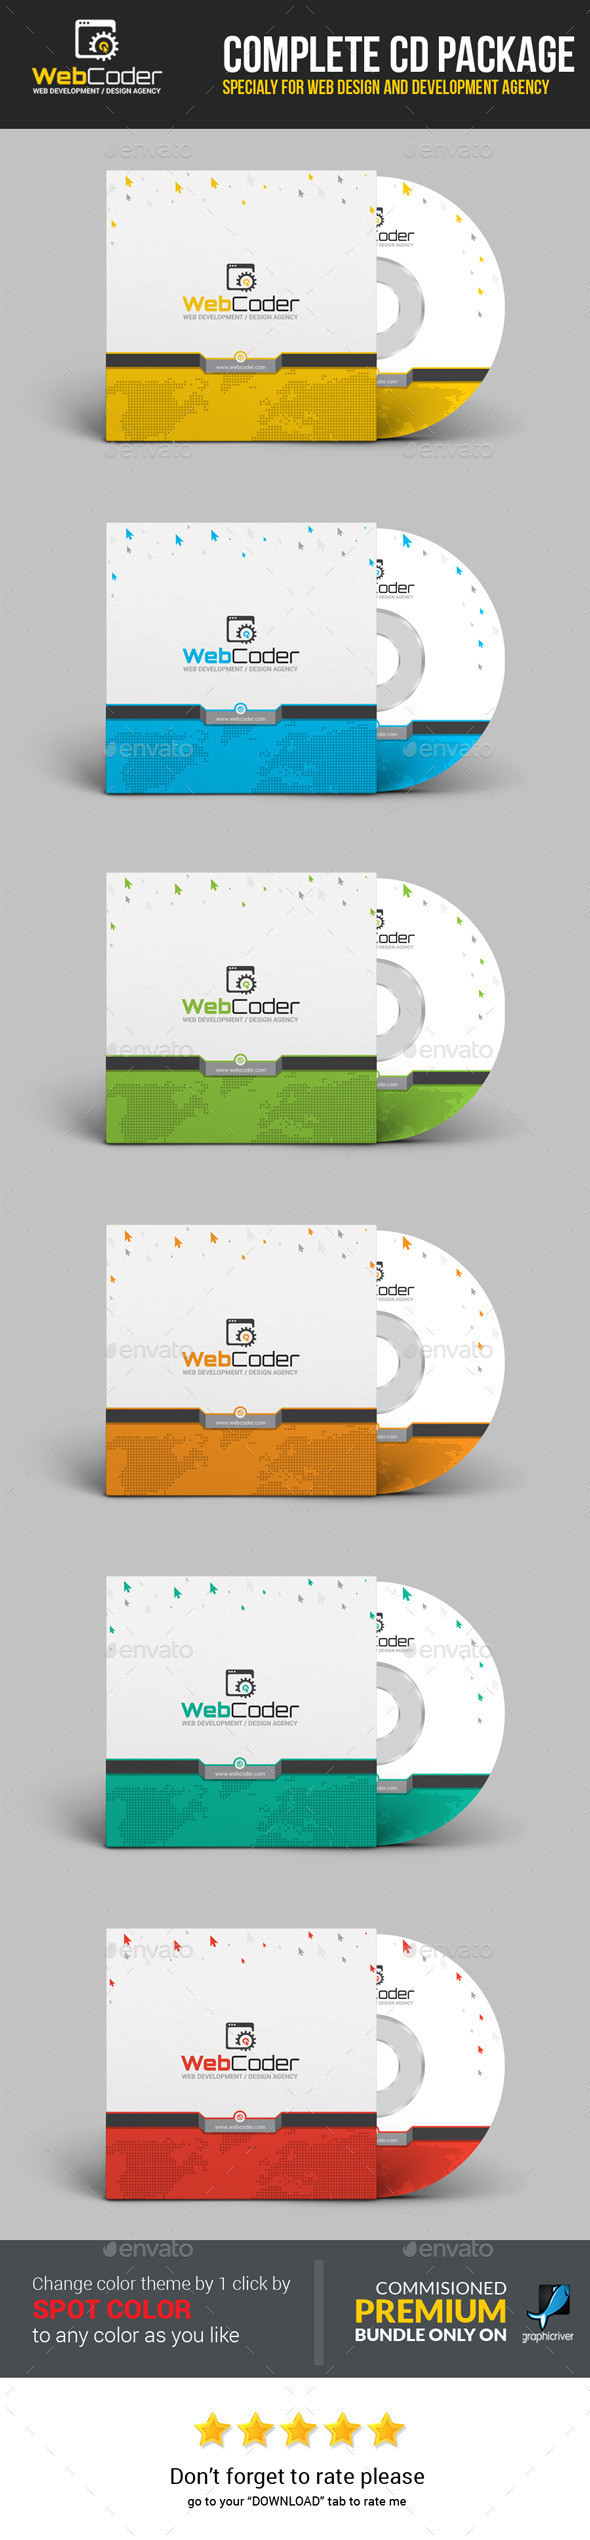 Web coder web design and web development project cd pack image preview